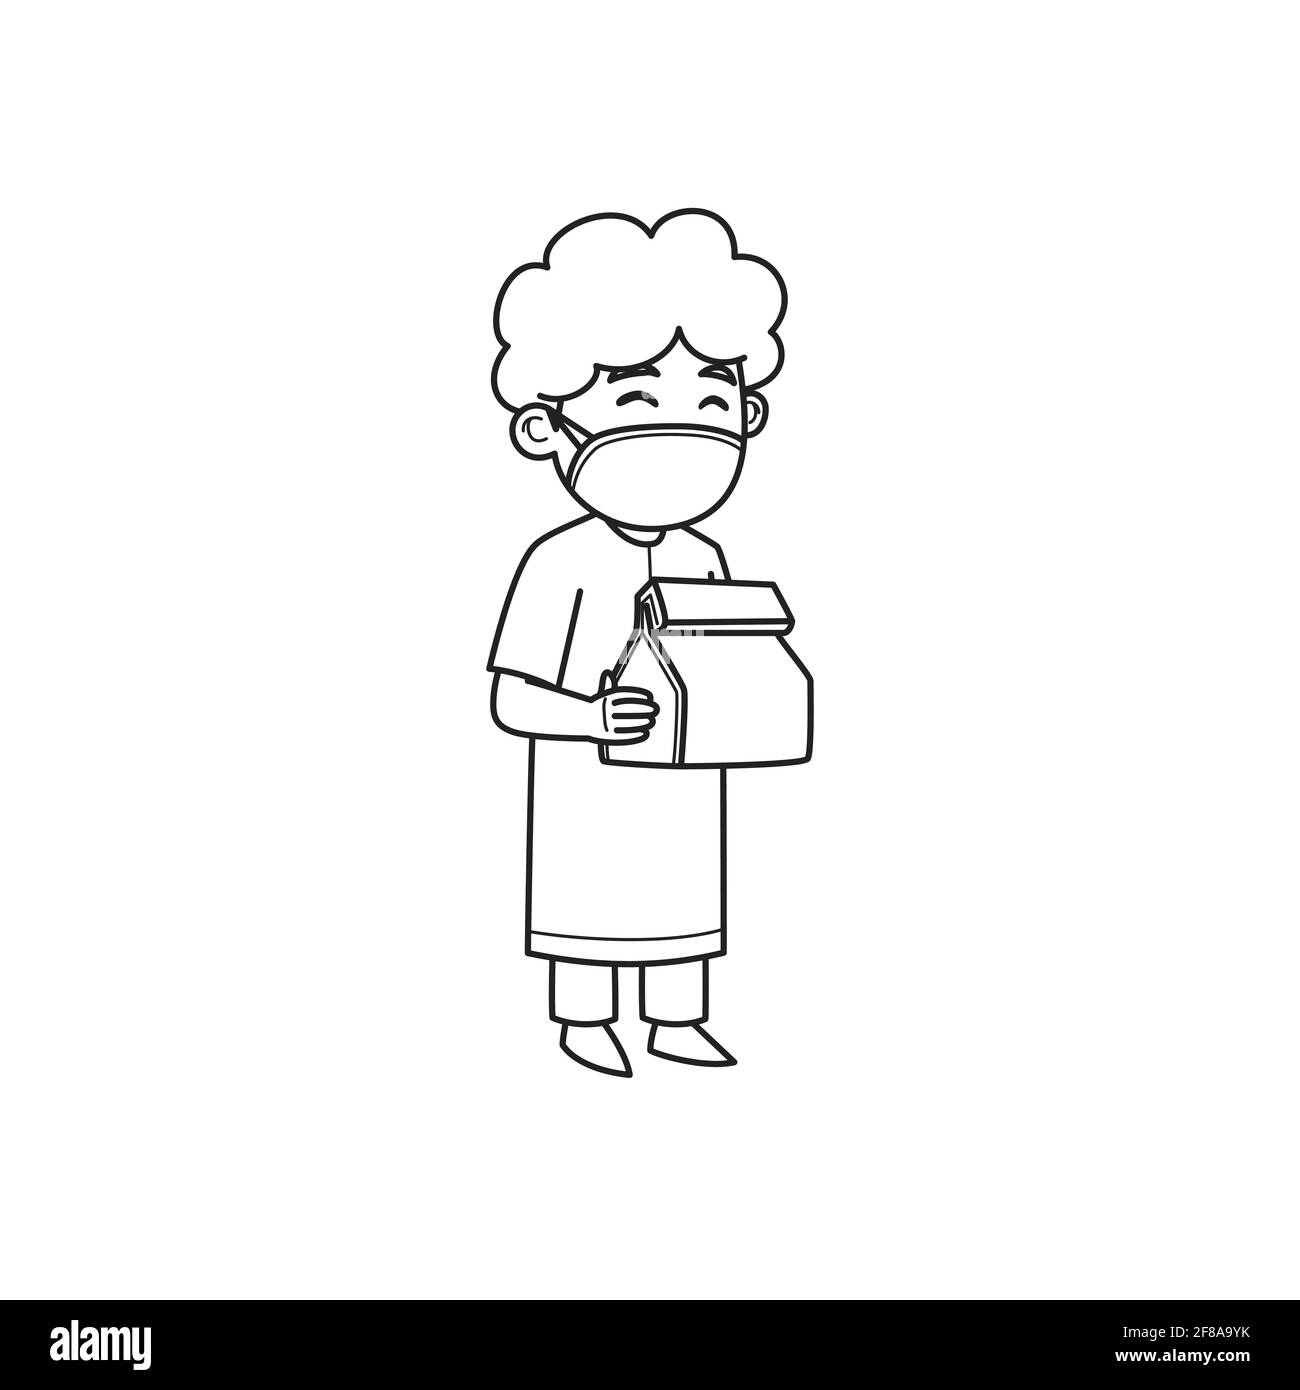 Child Character Holding a Gift to Distribute. Vector Illustration. Coloring Book. Stock Vector